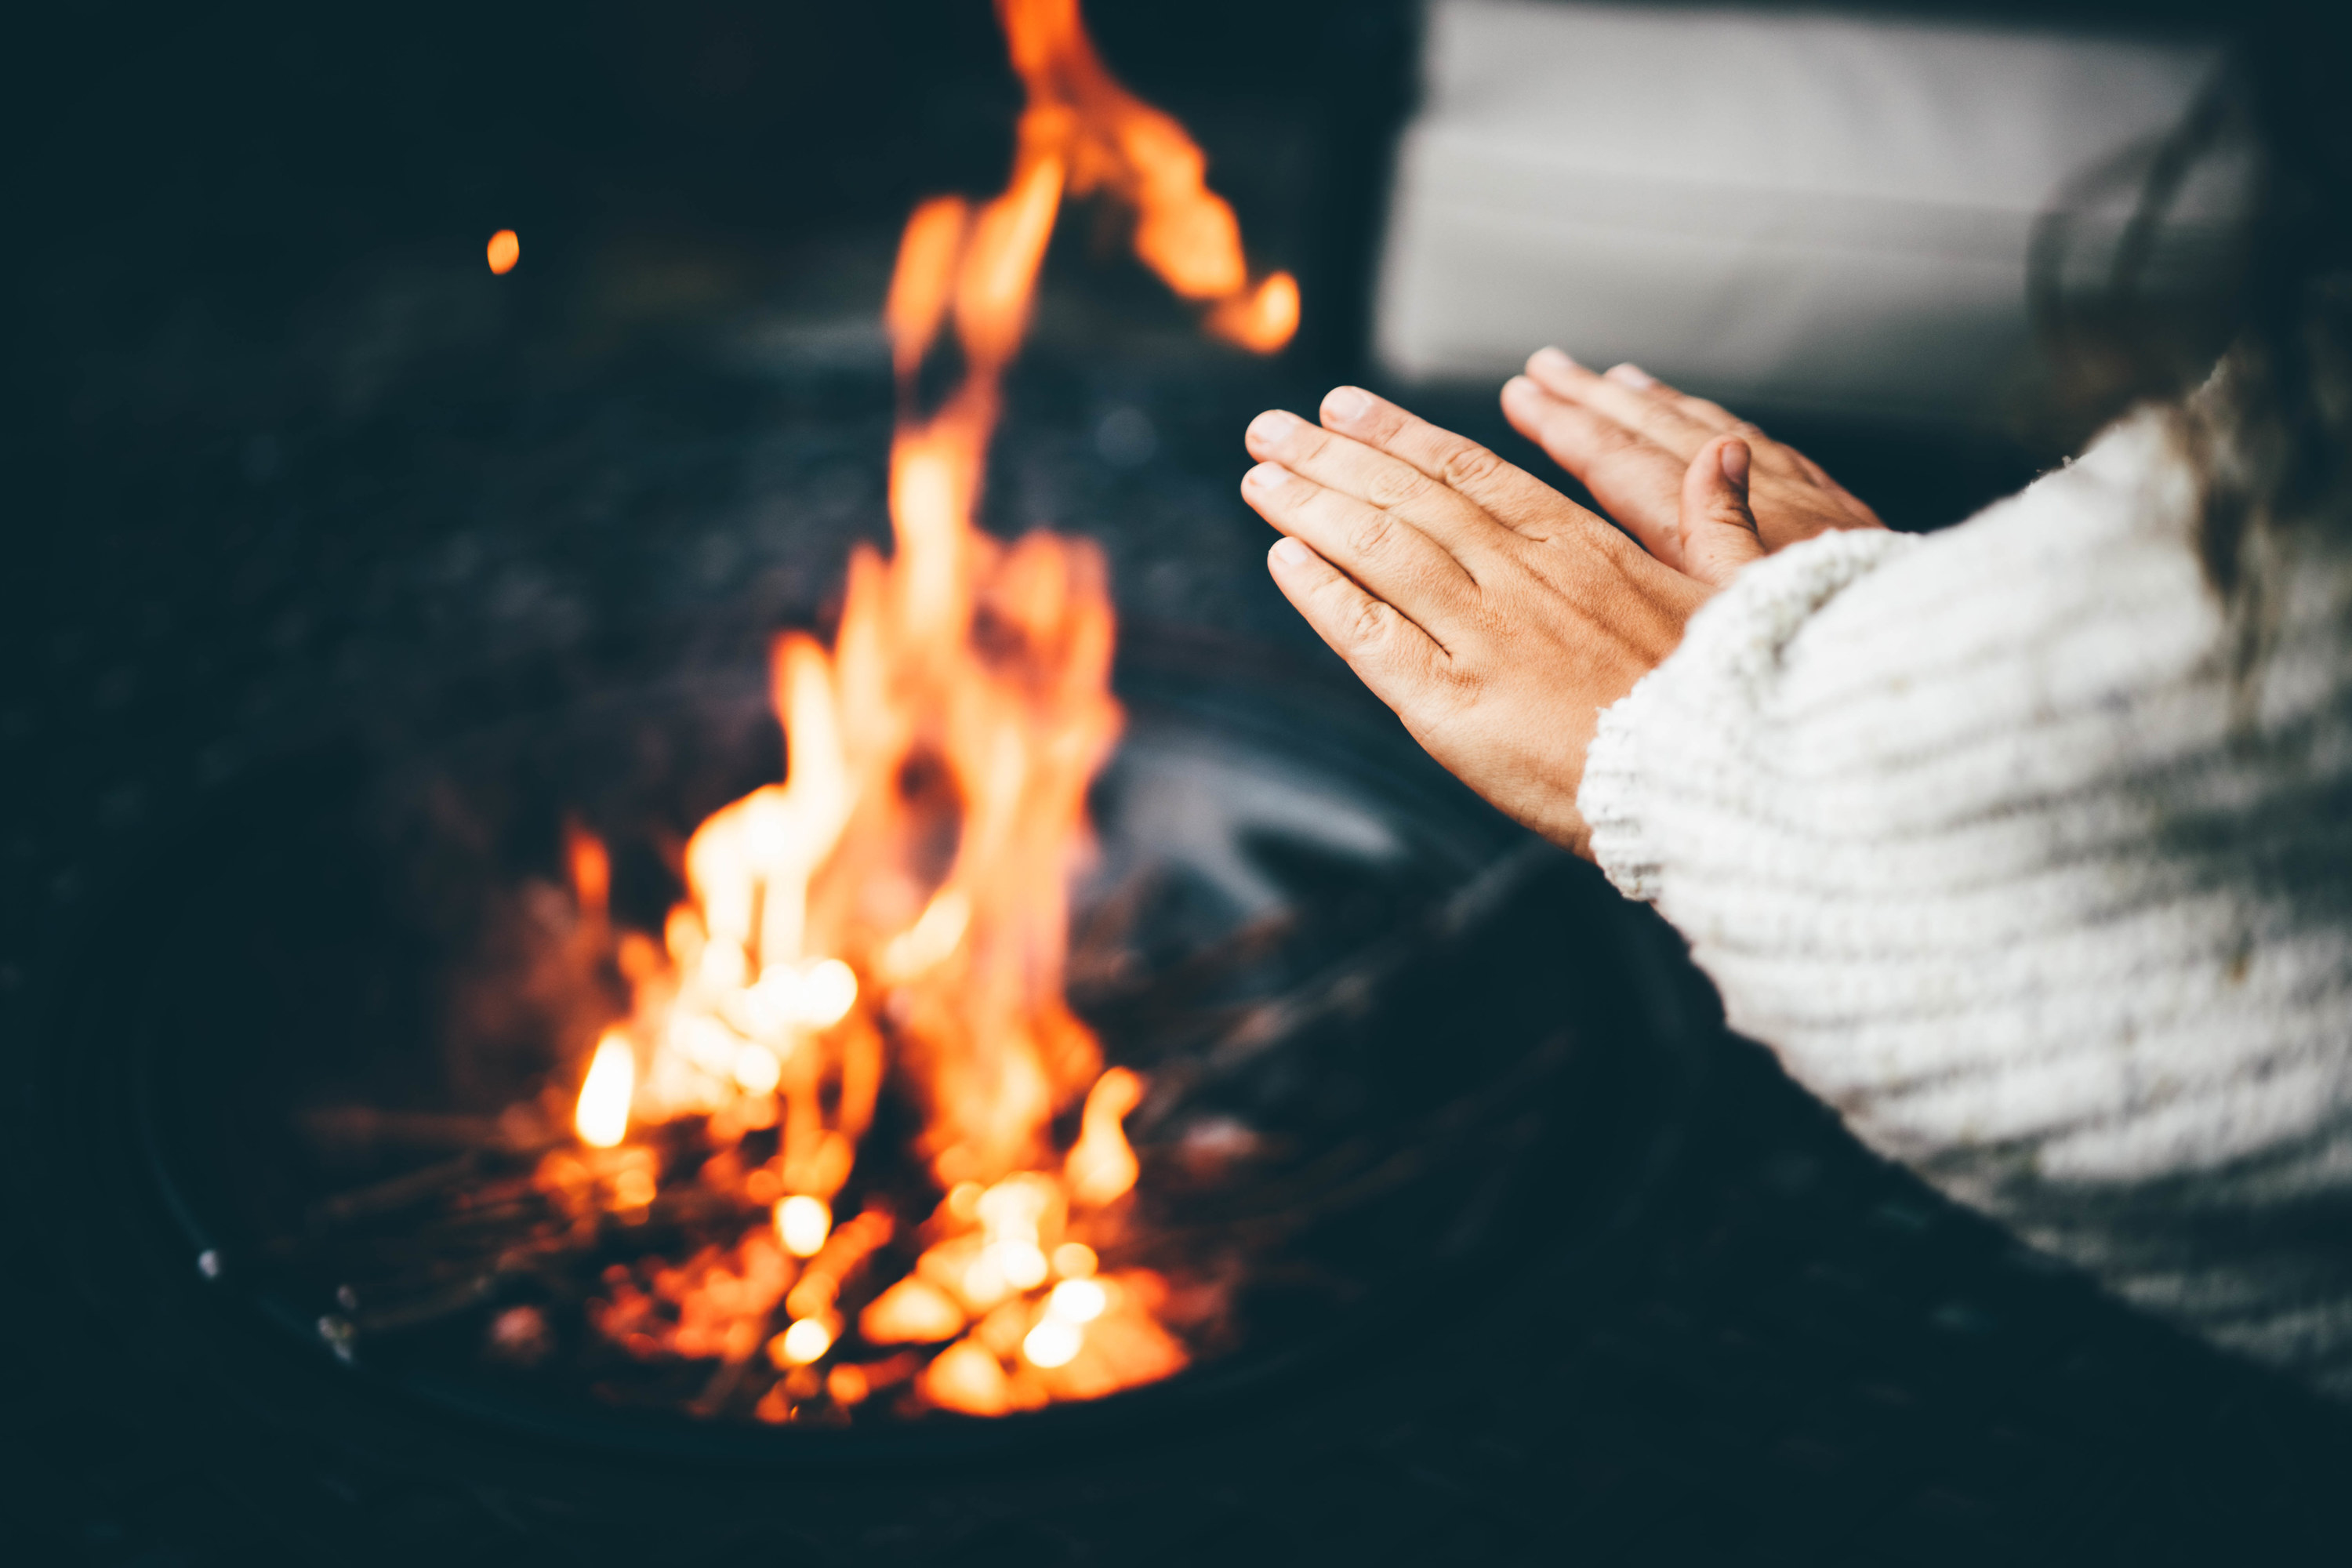 Warming hands by fire